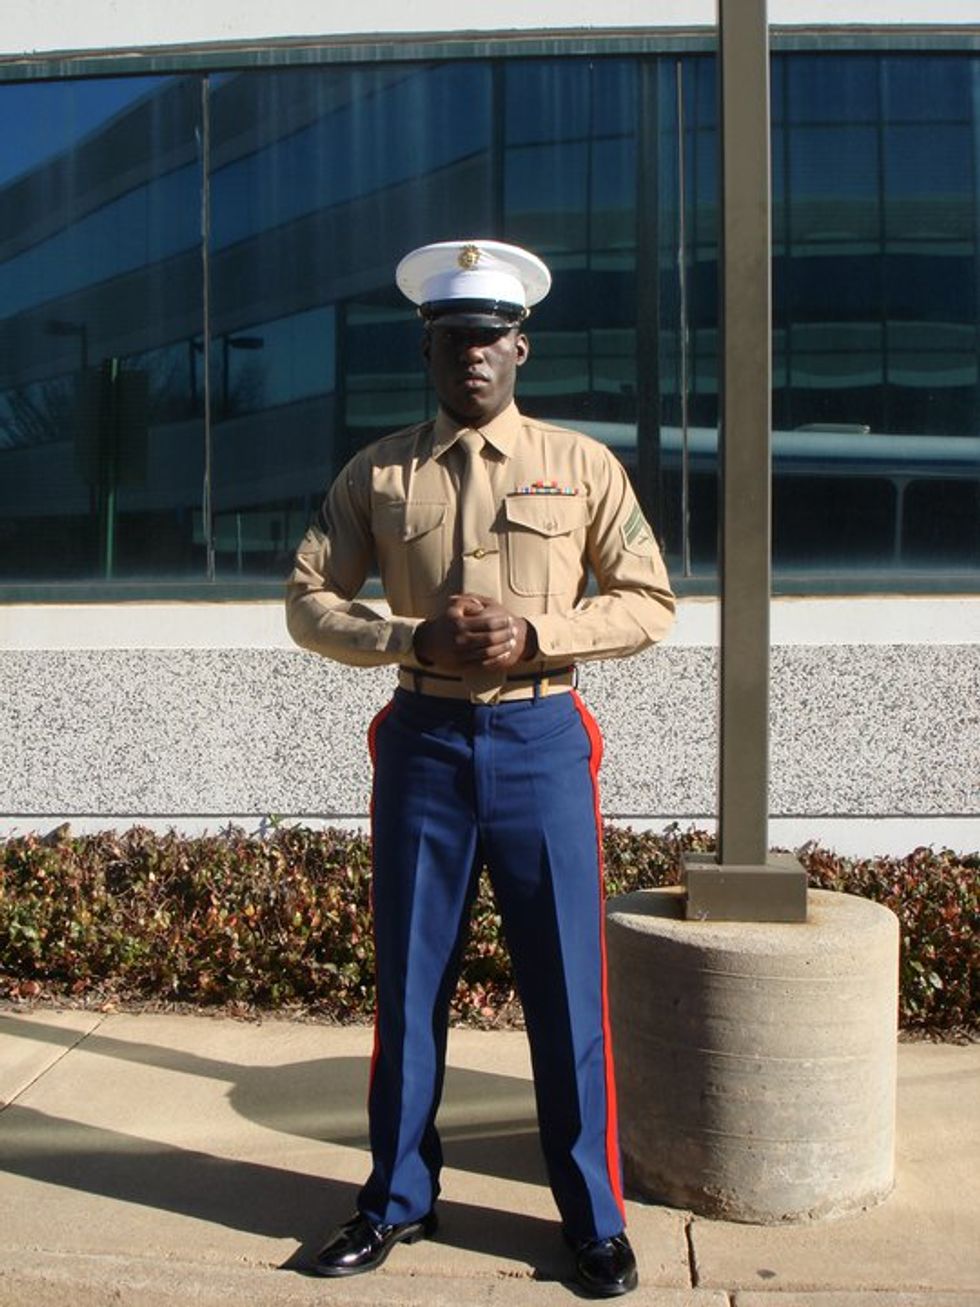 My Story Of Being A United States Marine In Greek Life